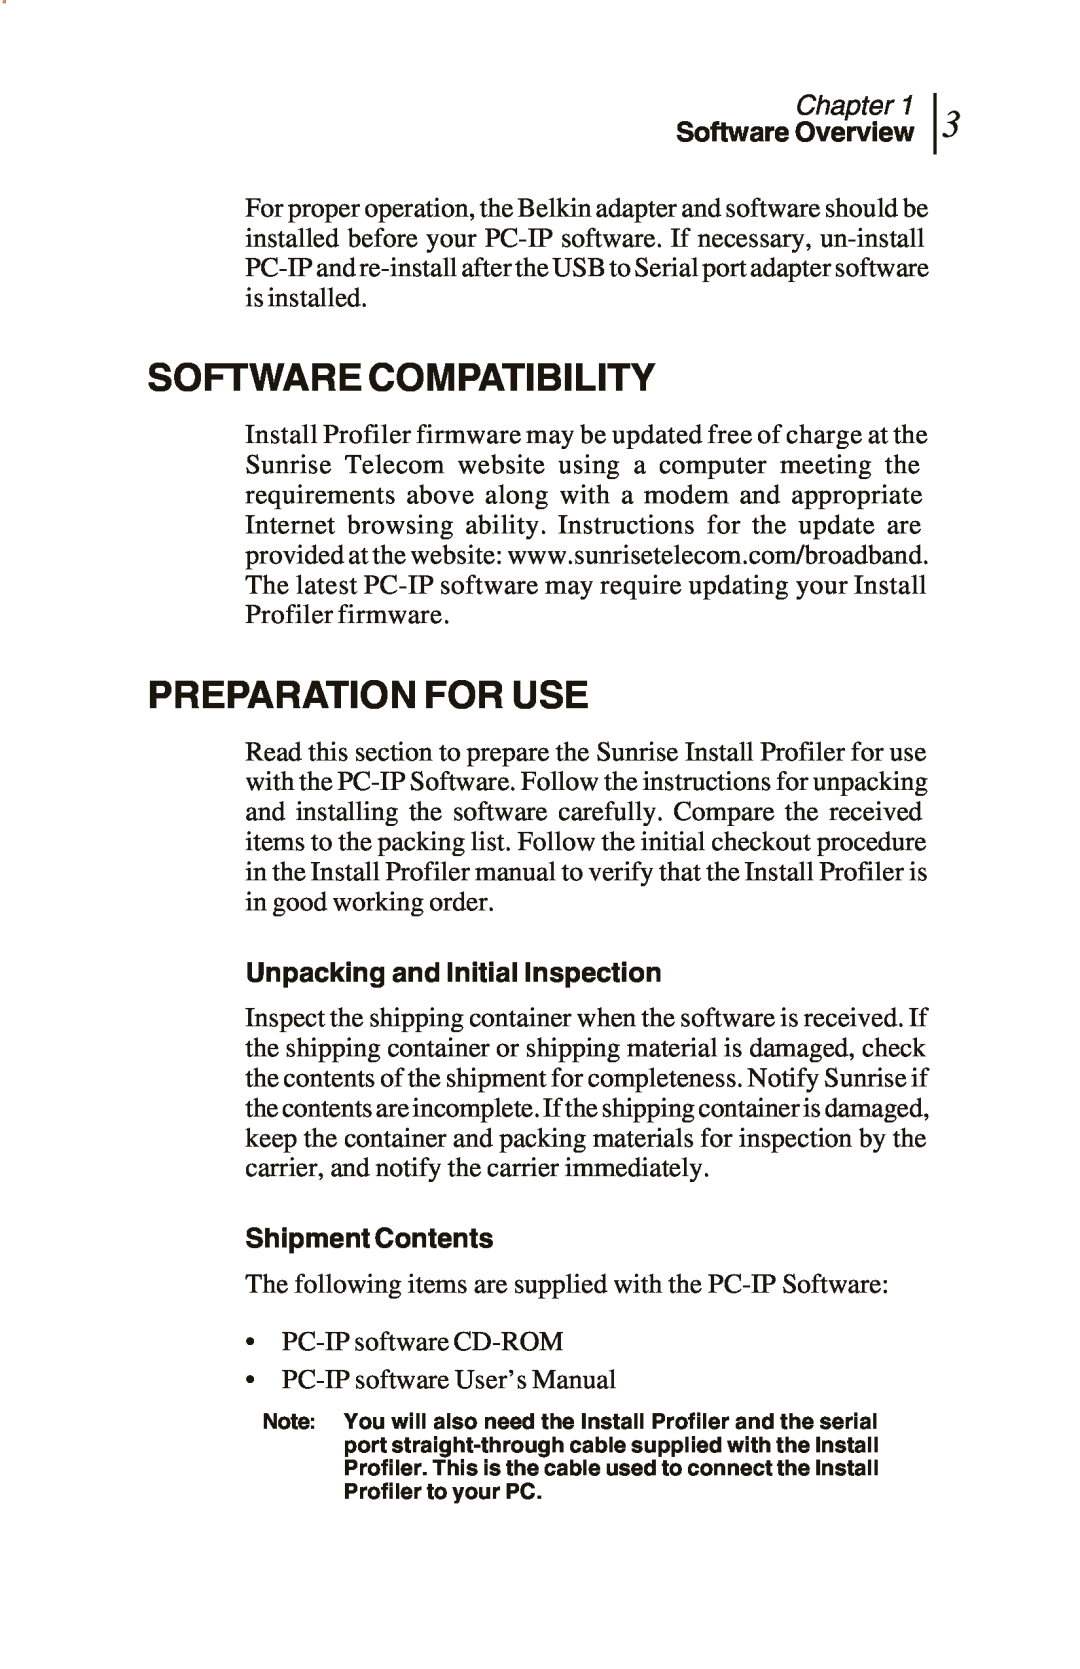 Sunrise Global CM100 IP Software Compatibility, Preparation For Use, Unpacking and Initial Inspection, Shipment Contents 